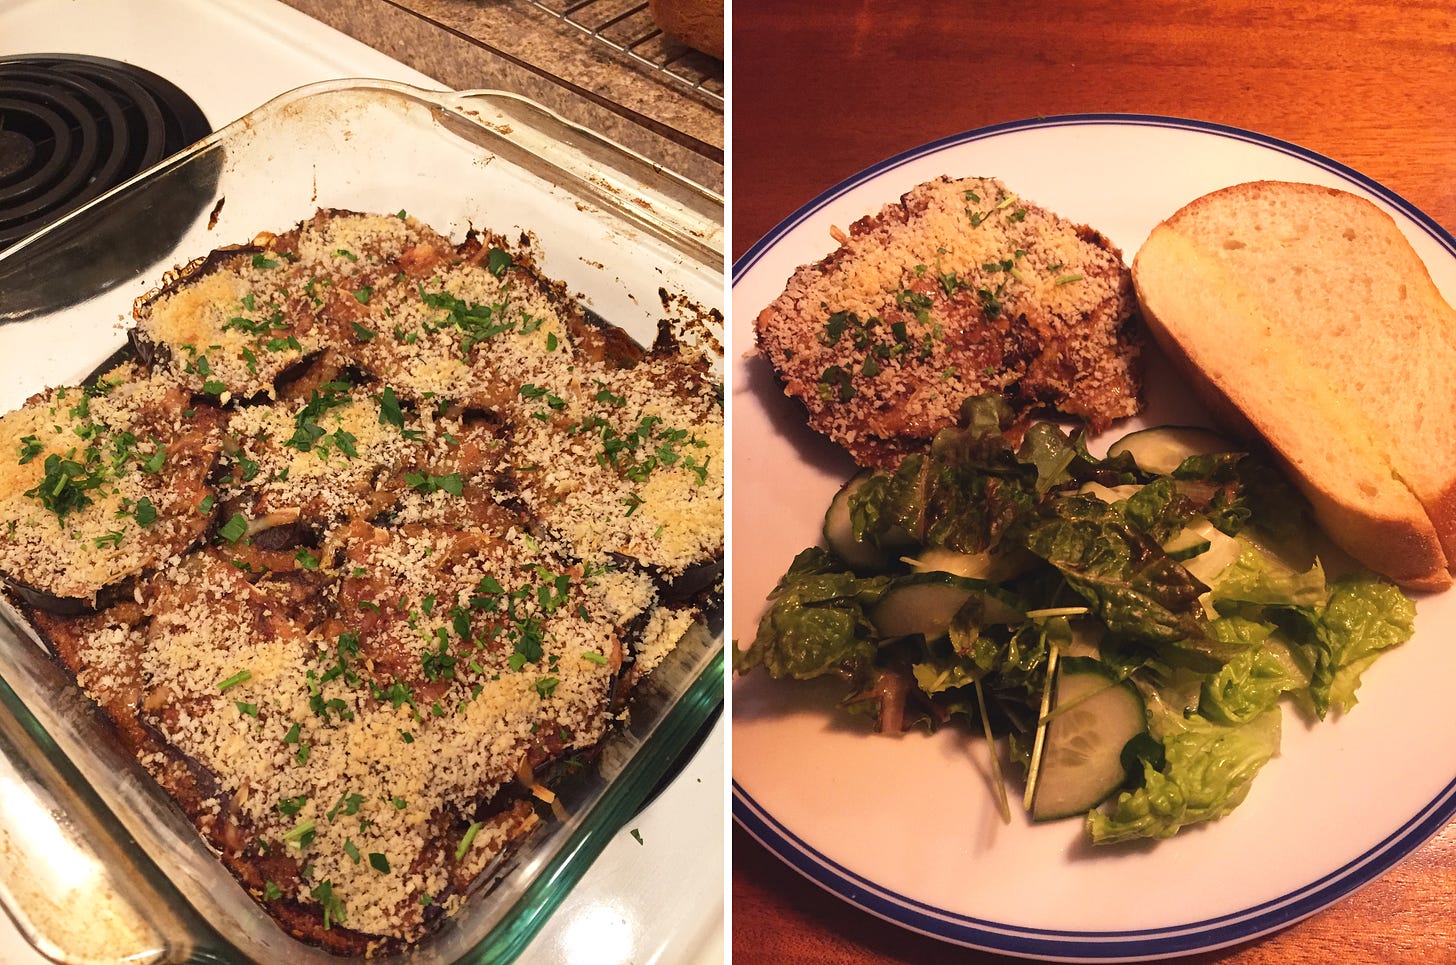 Left image: a pyrex dish of eggplant parmigiana, sprinkled with parsley. Right image: a plate featuring a piece of the parmigiana, a big piece of garlic bread, and a green salad with pea shoots and cucumbers visible.